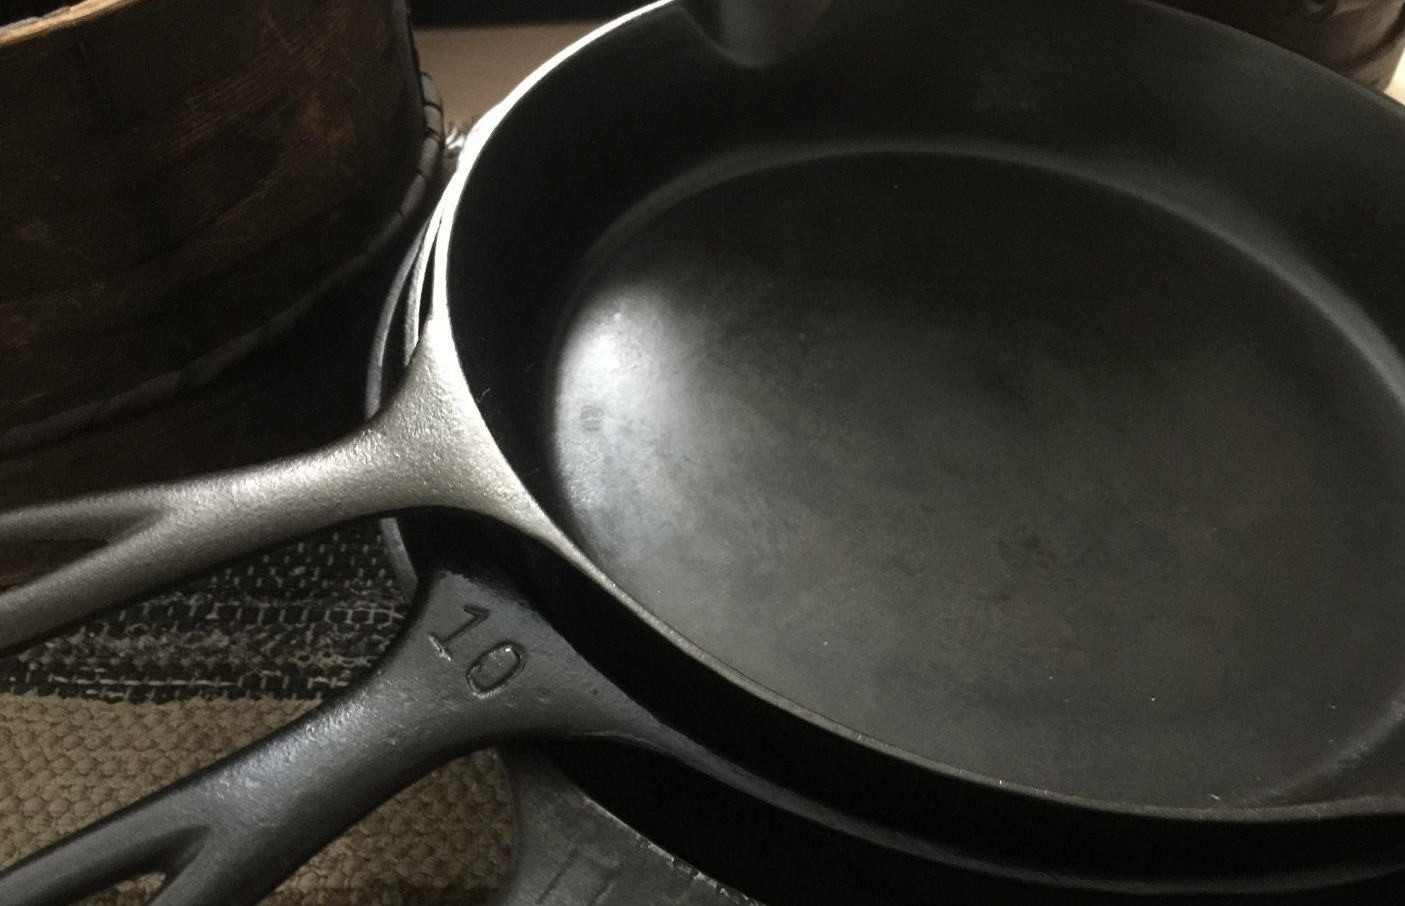 Today's haul: Wagner skillet oven bottom, Griswold sbl 10, Iron